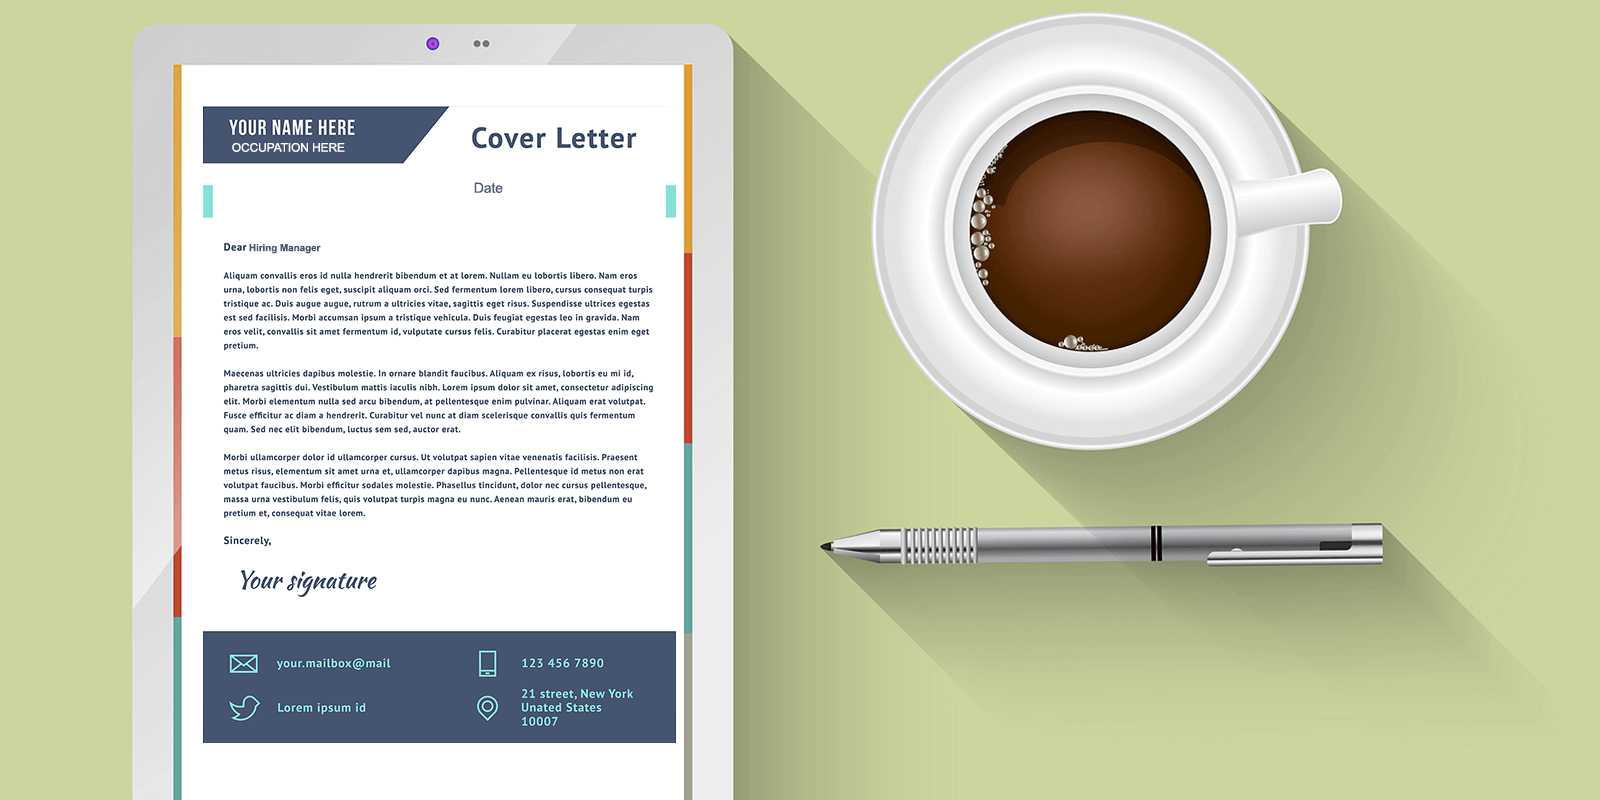 Customizing your cover letter for how to find a job